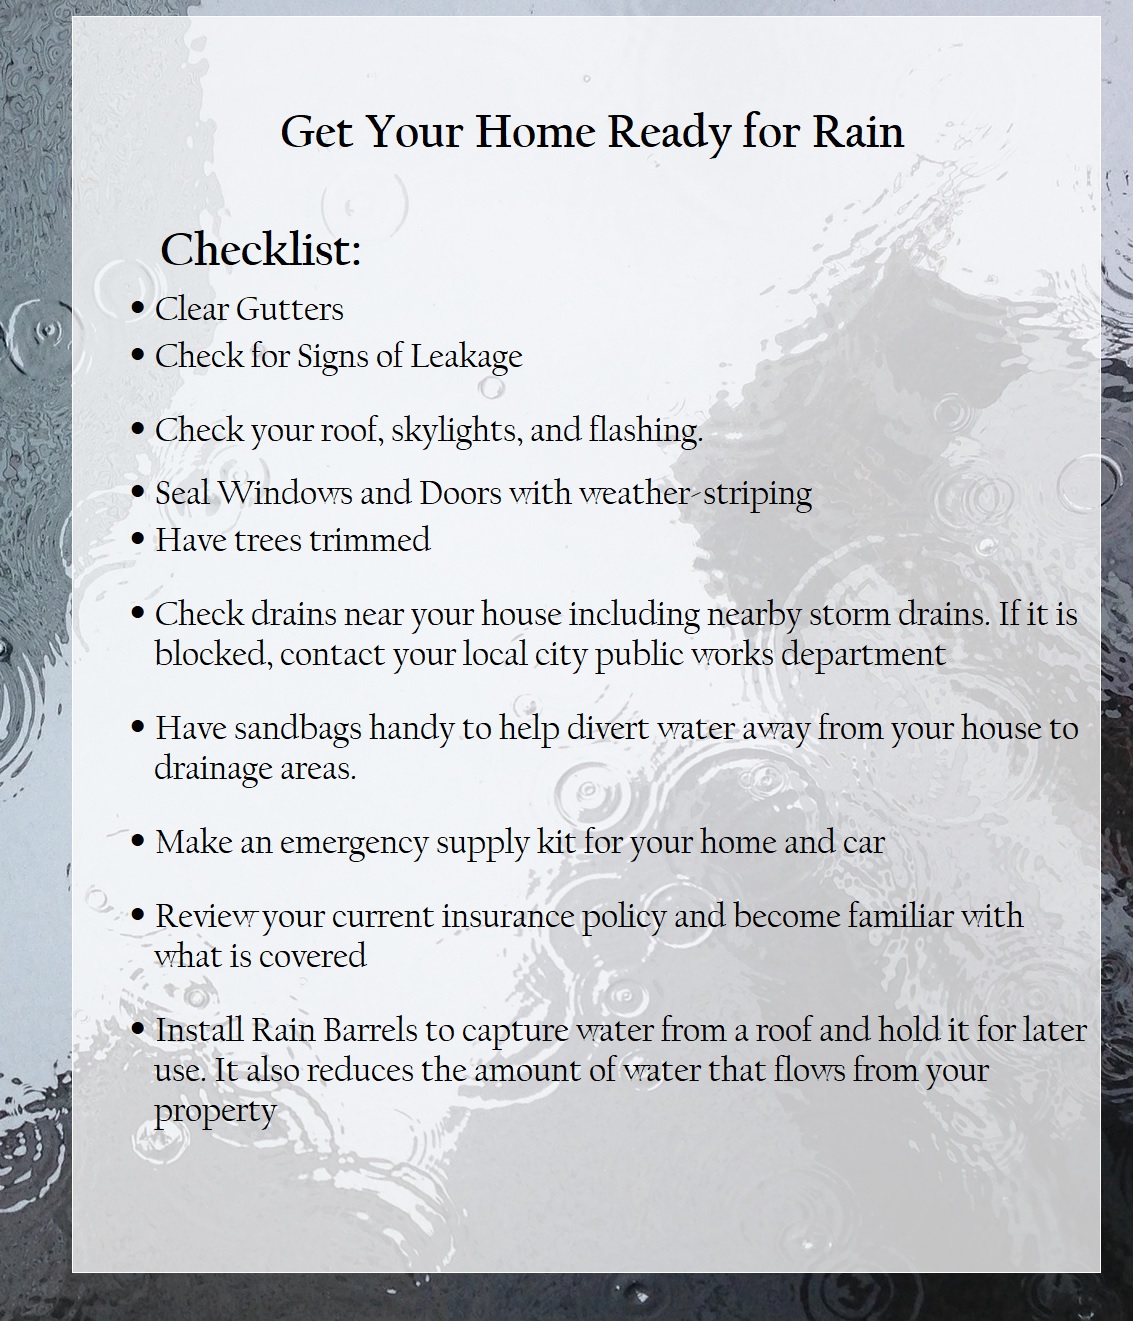 Be Prepared for Rain with These Tips from A Property Manager